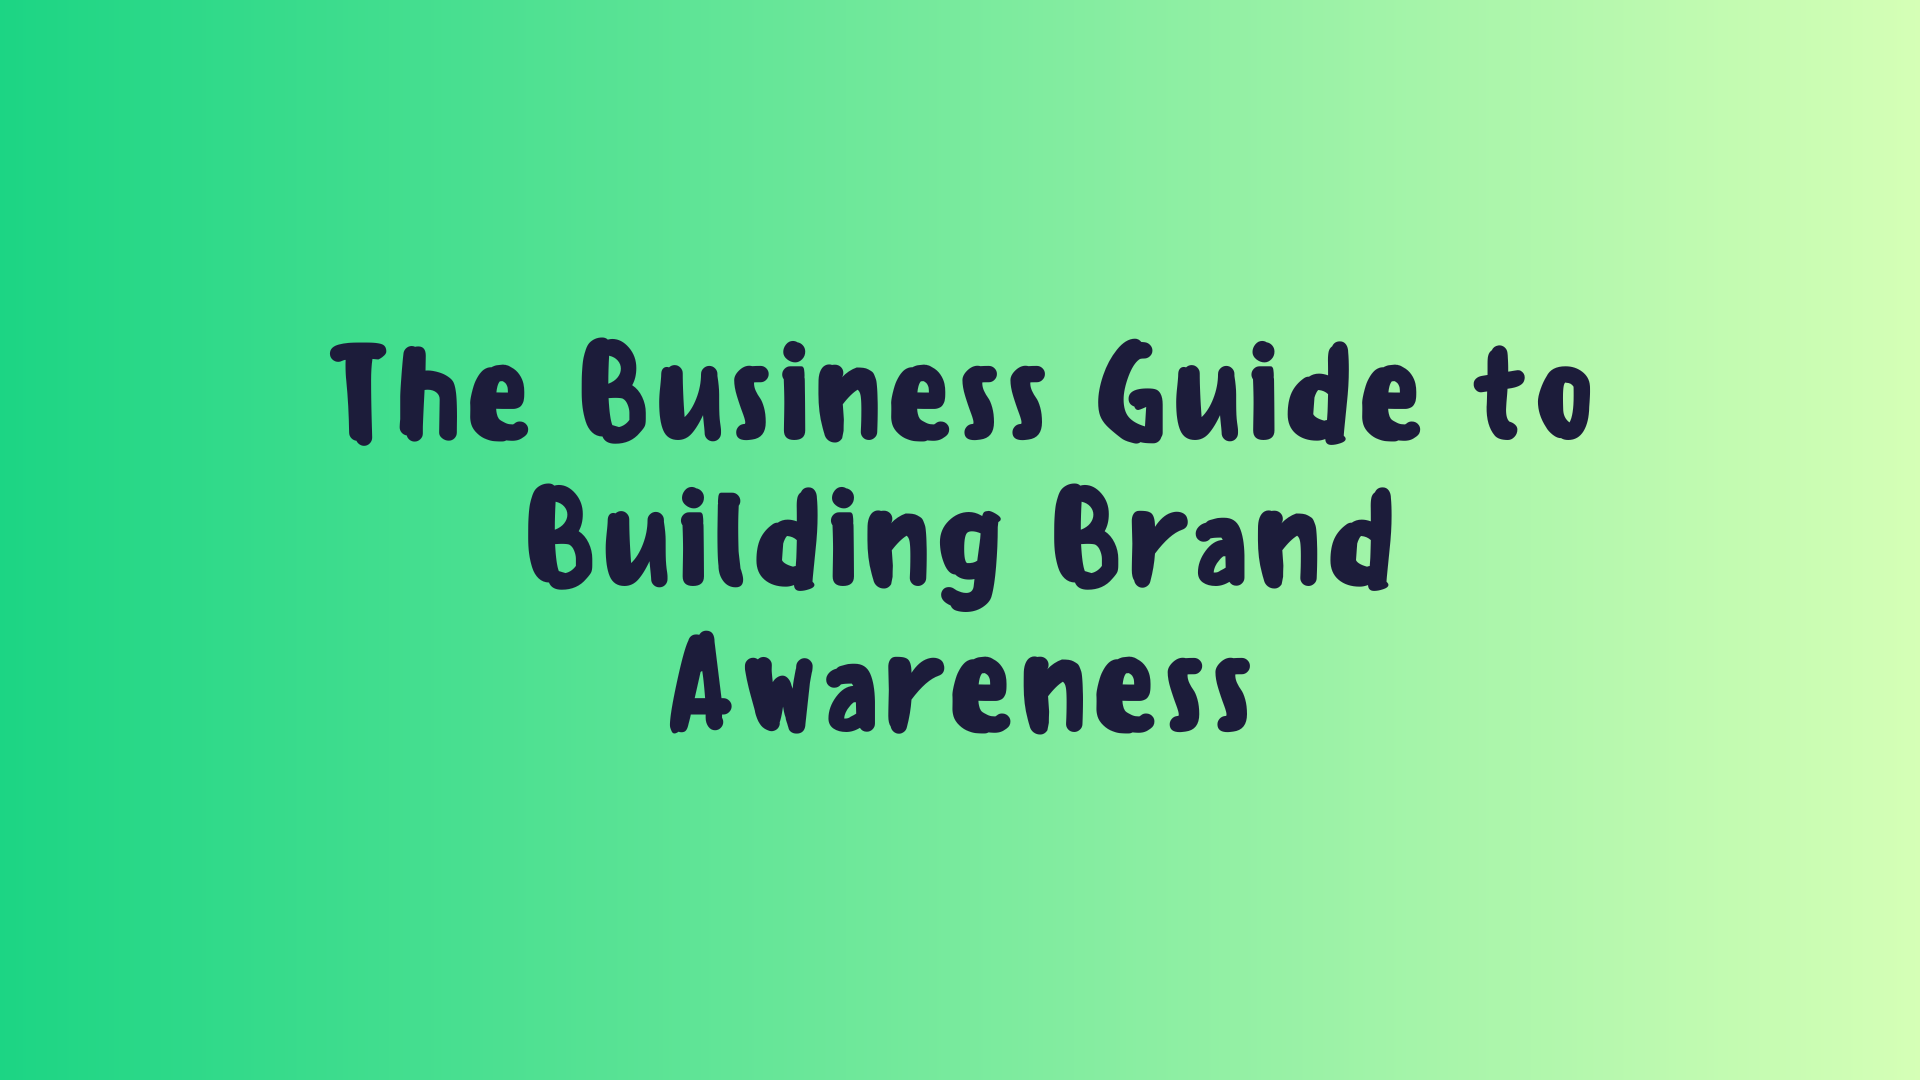 The Business Guide to Building Brand Awareness